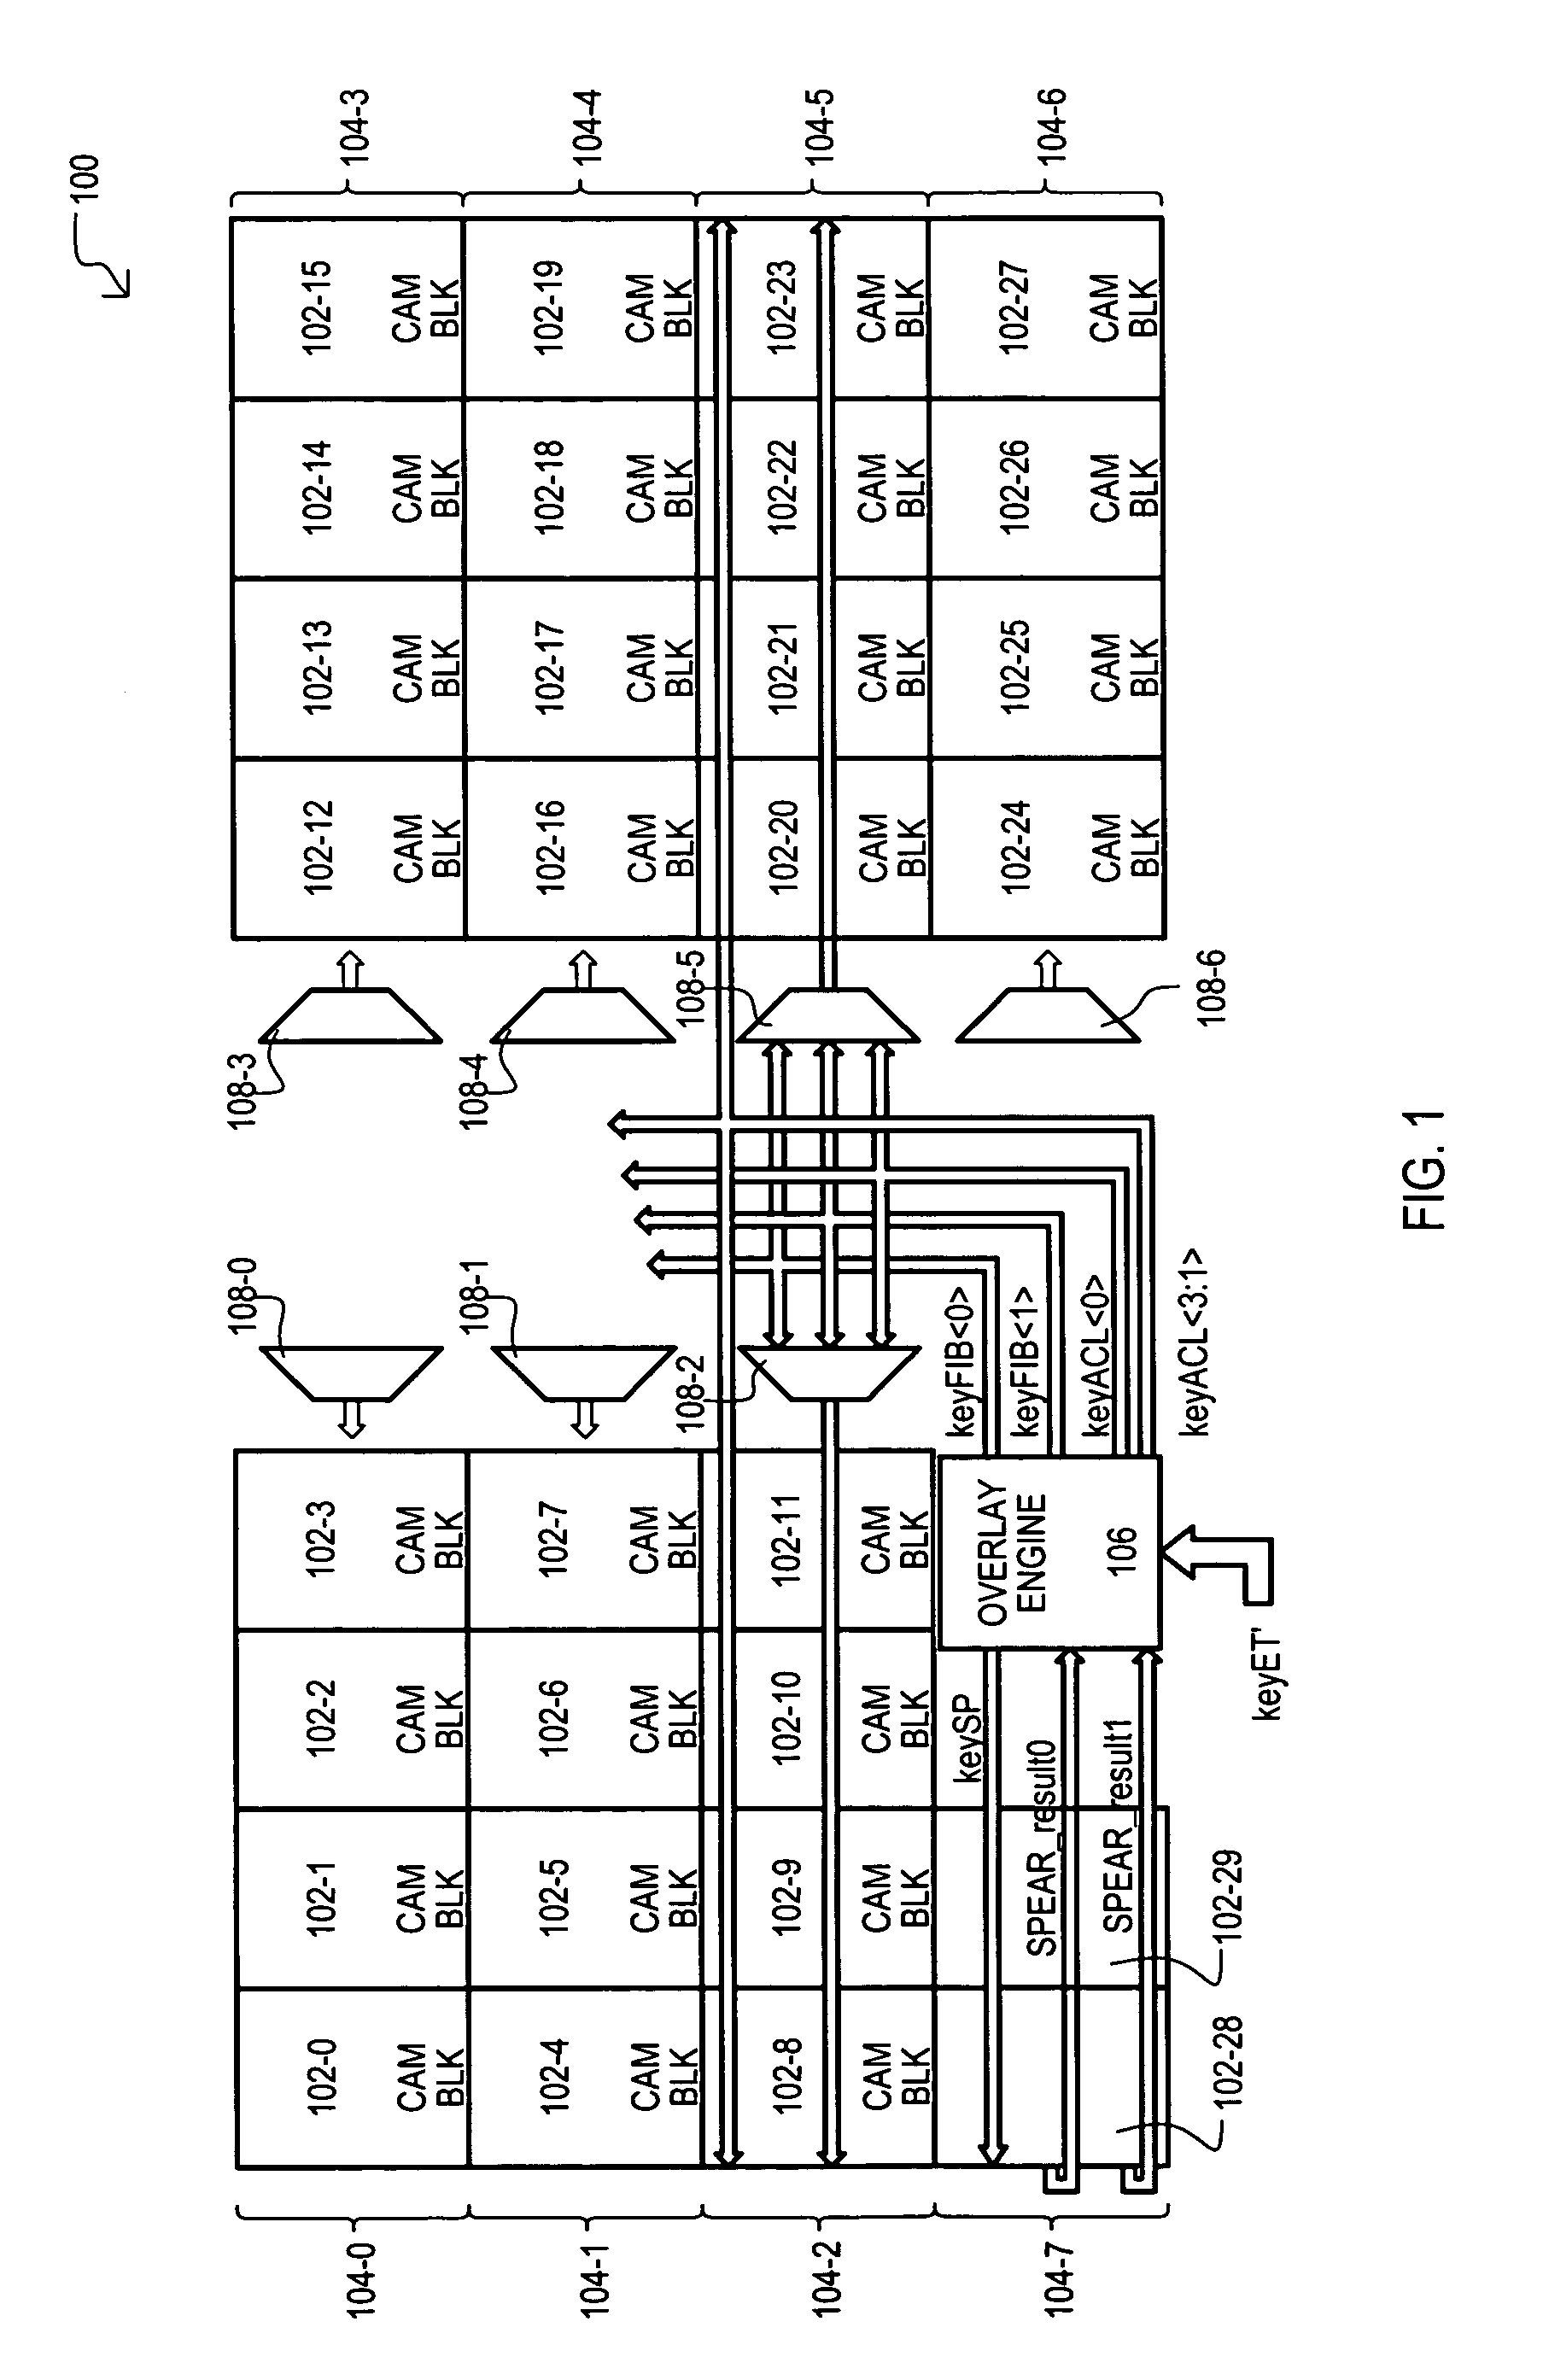 Method and apparatus for overlaying flat and tree based data sets onto content addressable memory (CAM) device